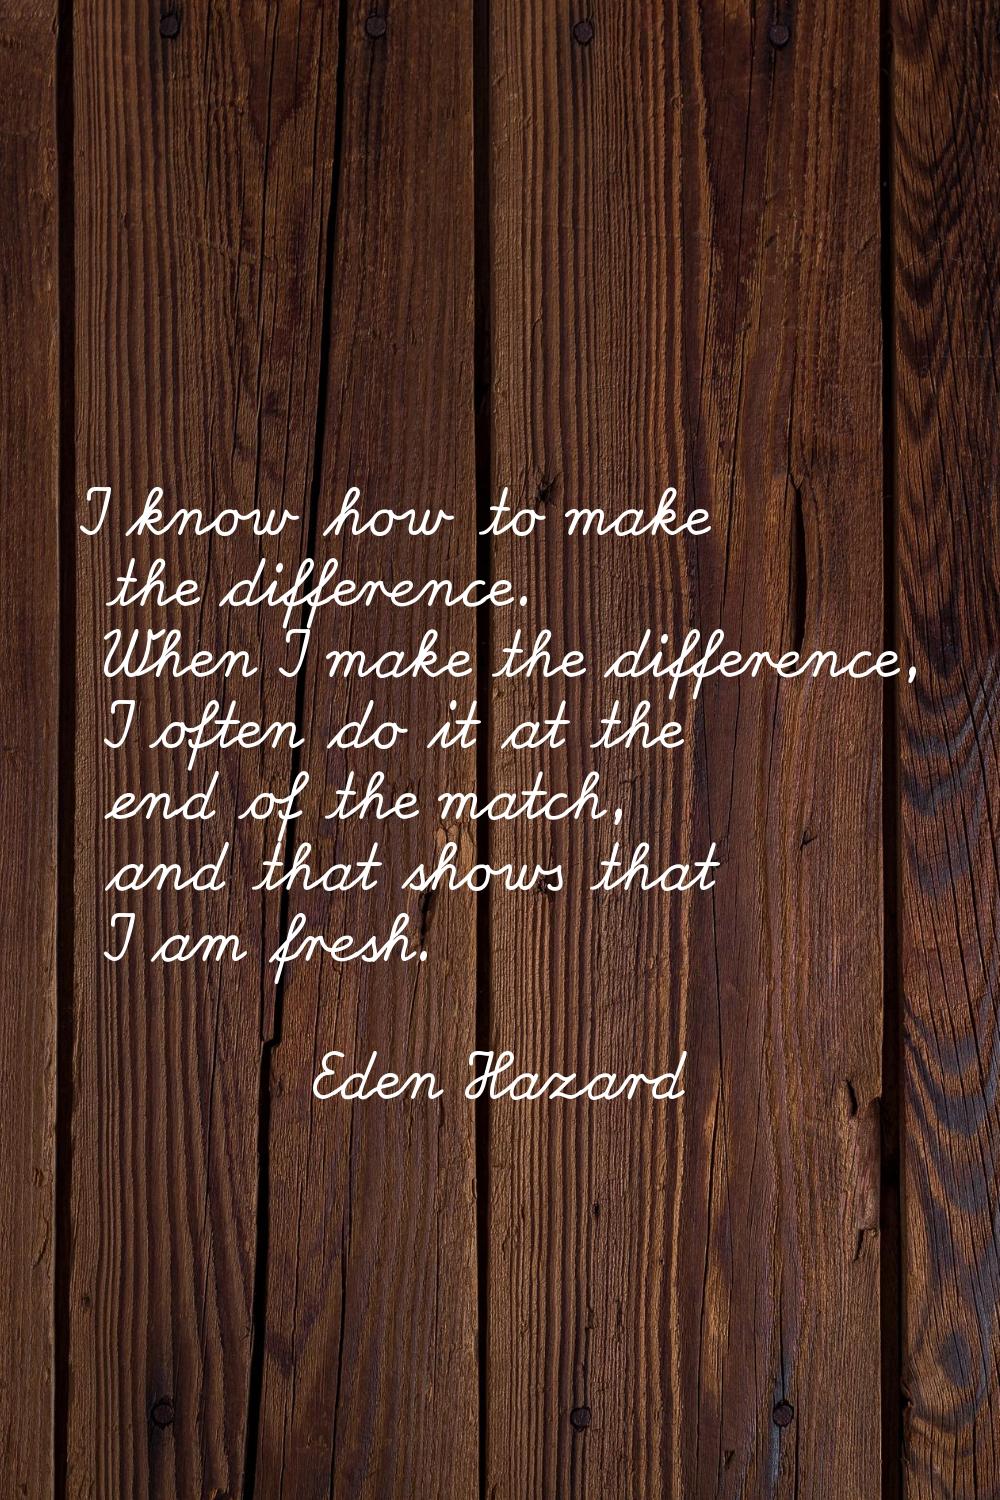 I know how to make the difference. When I make the difference, I often do it at the end of the matc